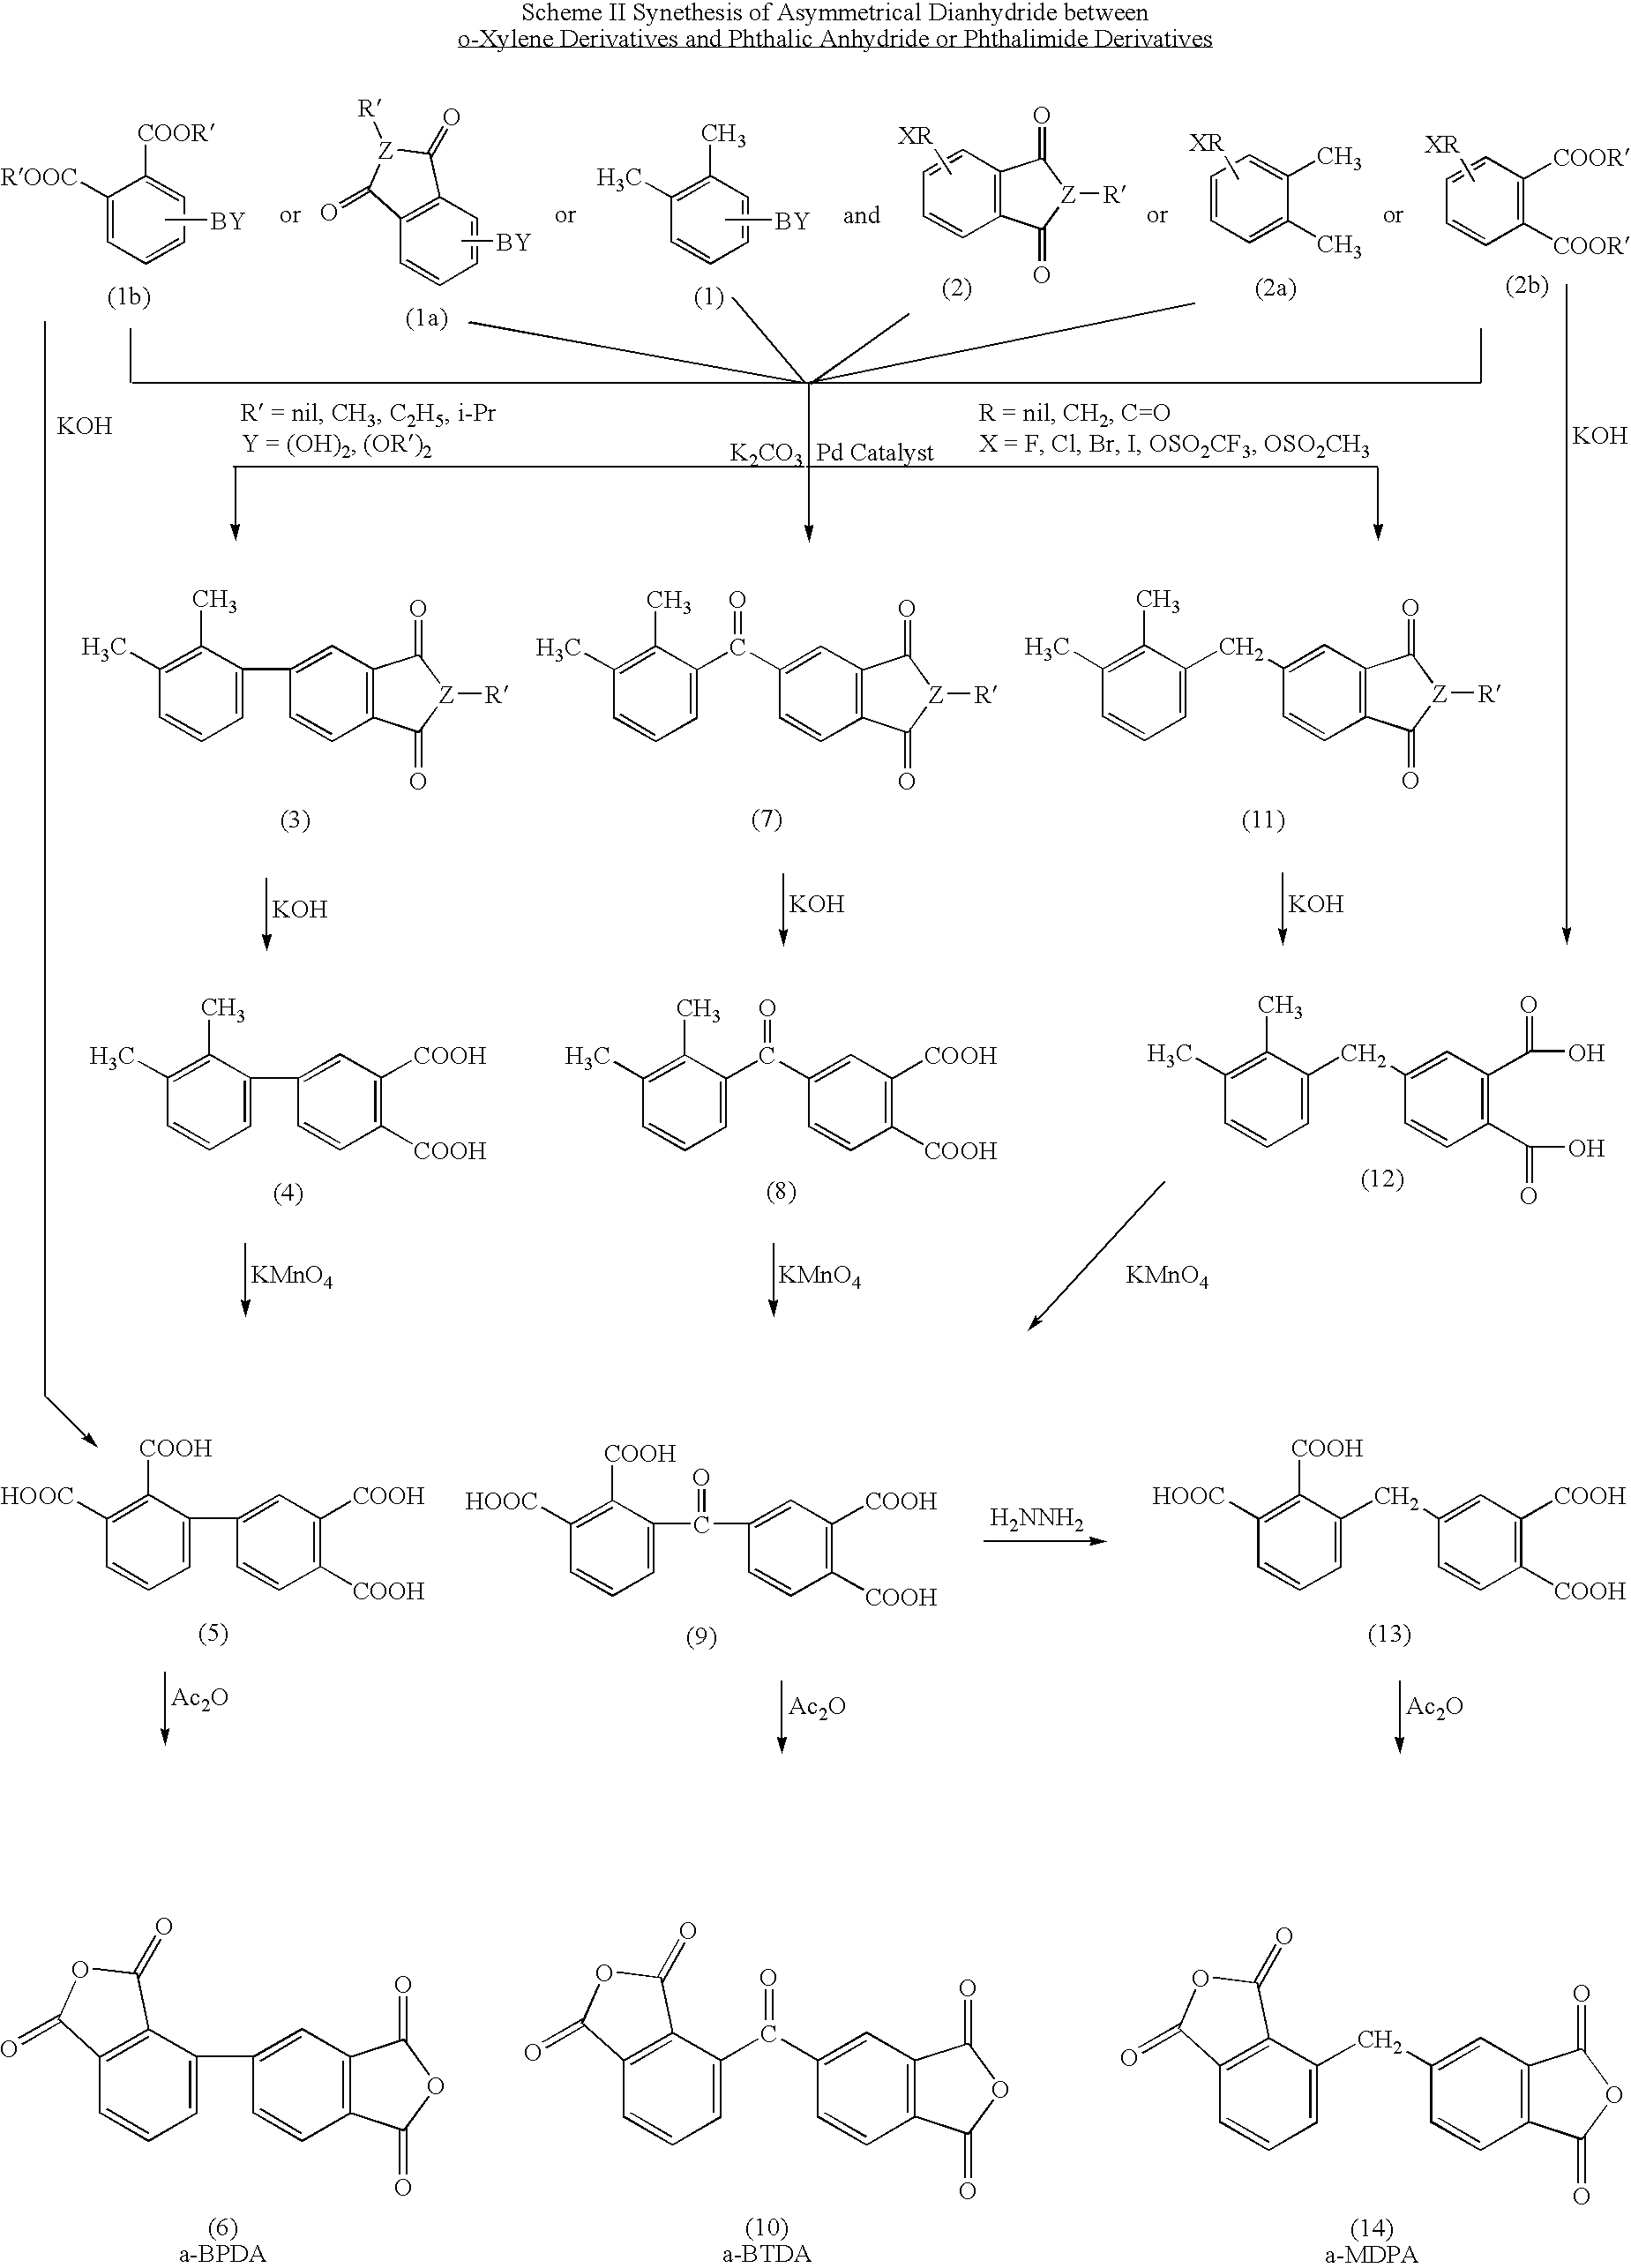 Synthesis of asymmetric tetracarboxylic acids and dianhydrides